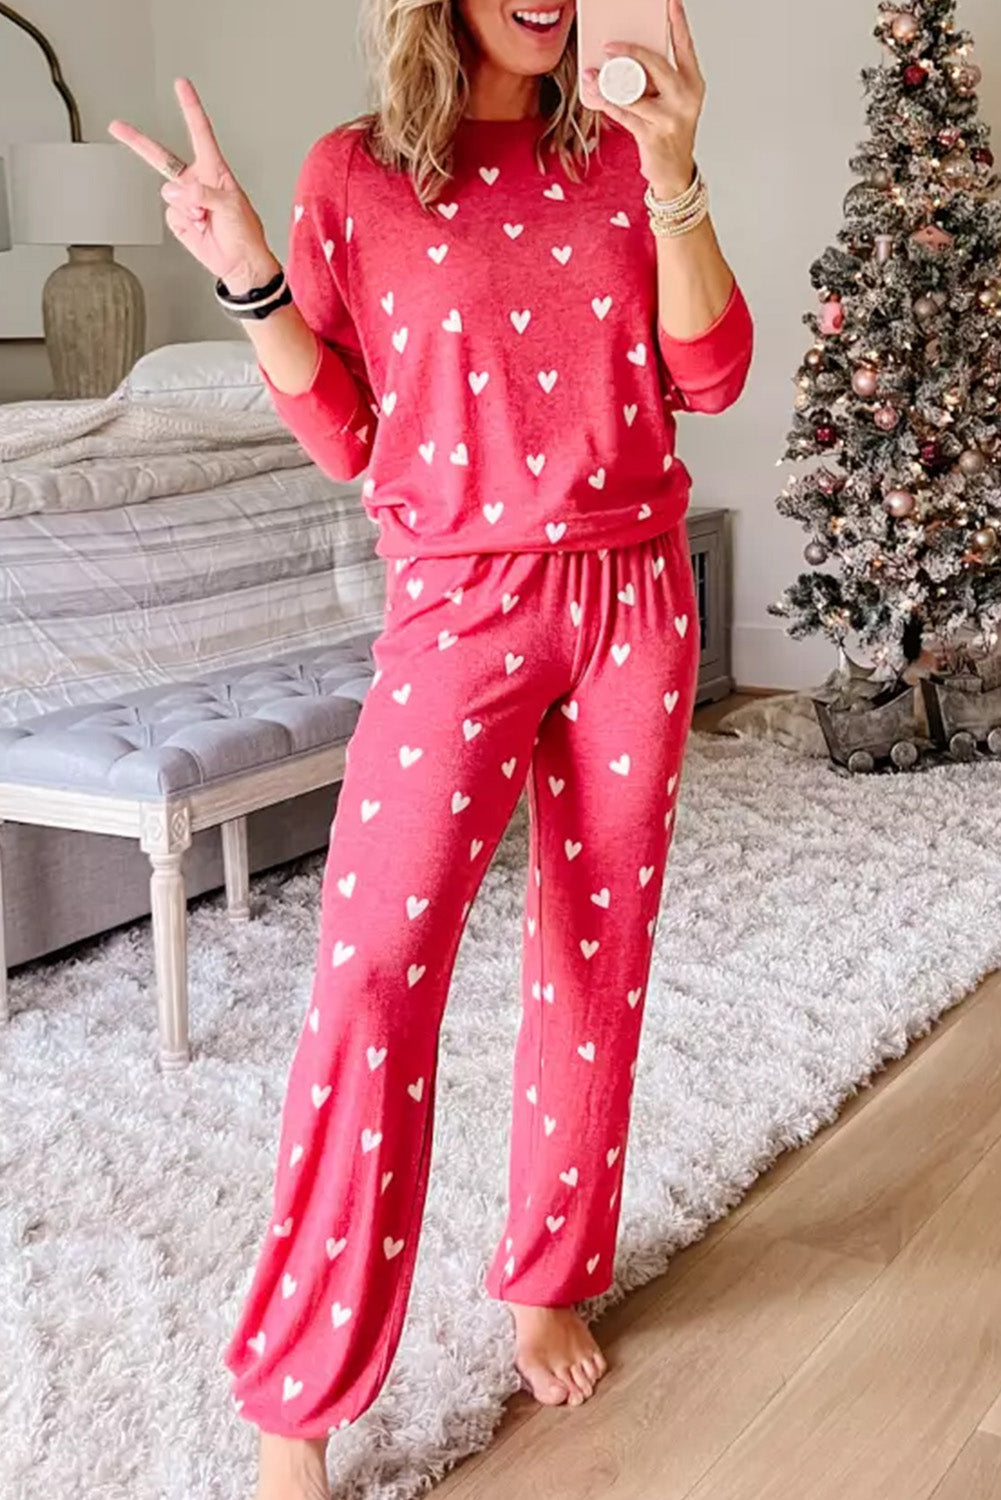 Fiery Red 95%Polyester+5%Elastane - Valentines Heart Print Pants Outfit Set - womens pants set at TFC&H Co.